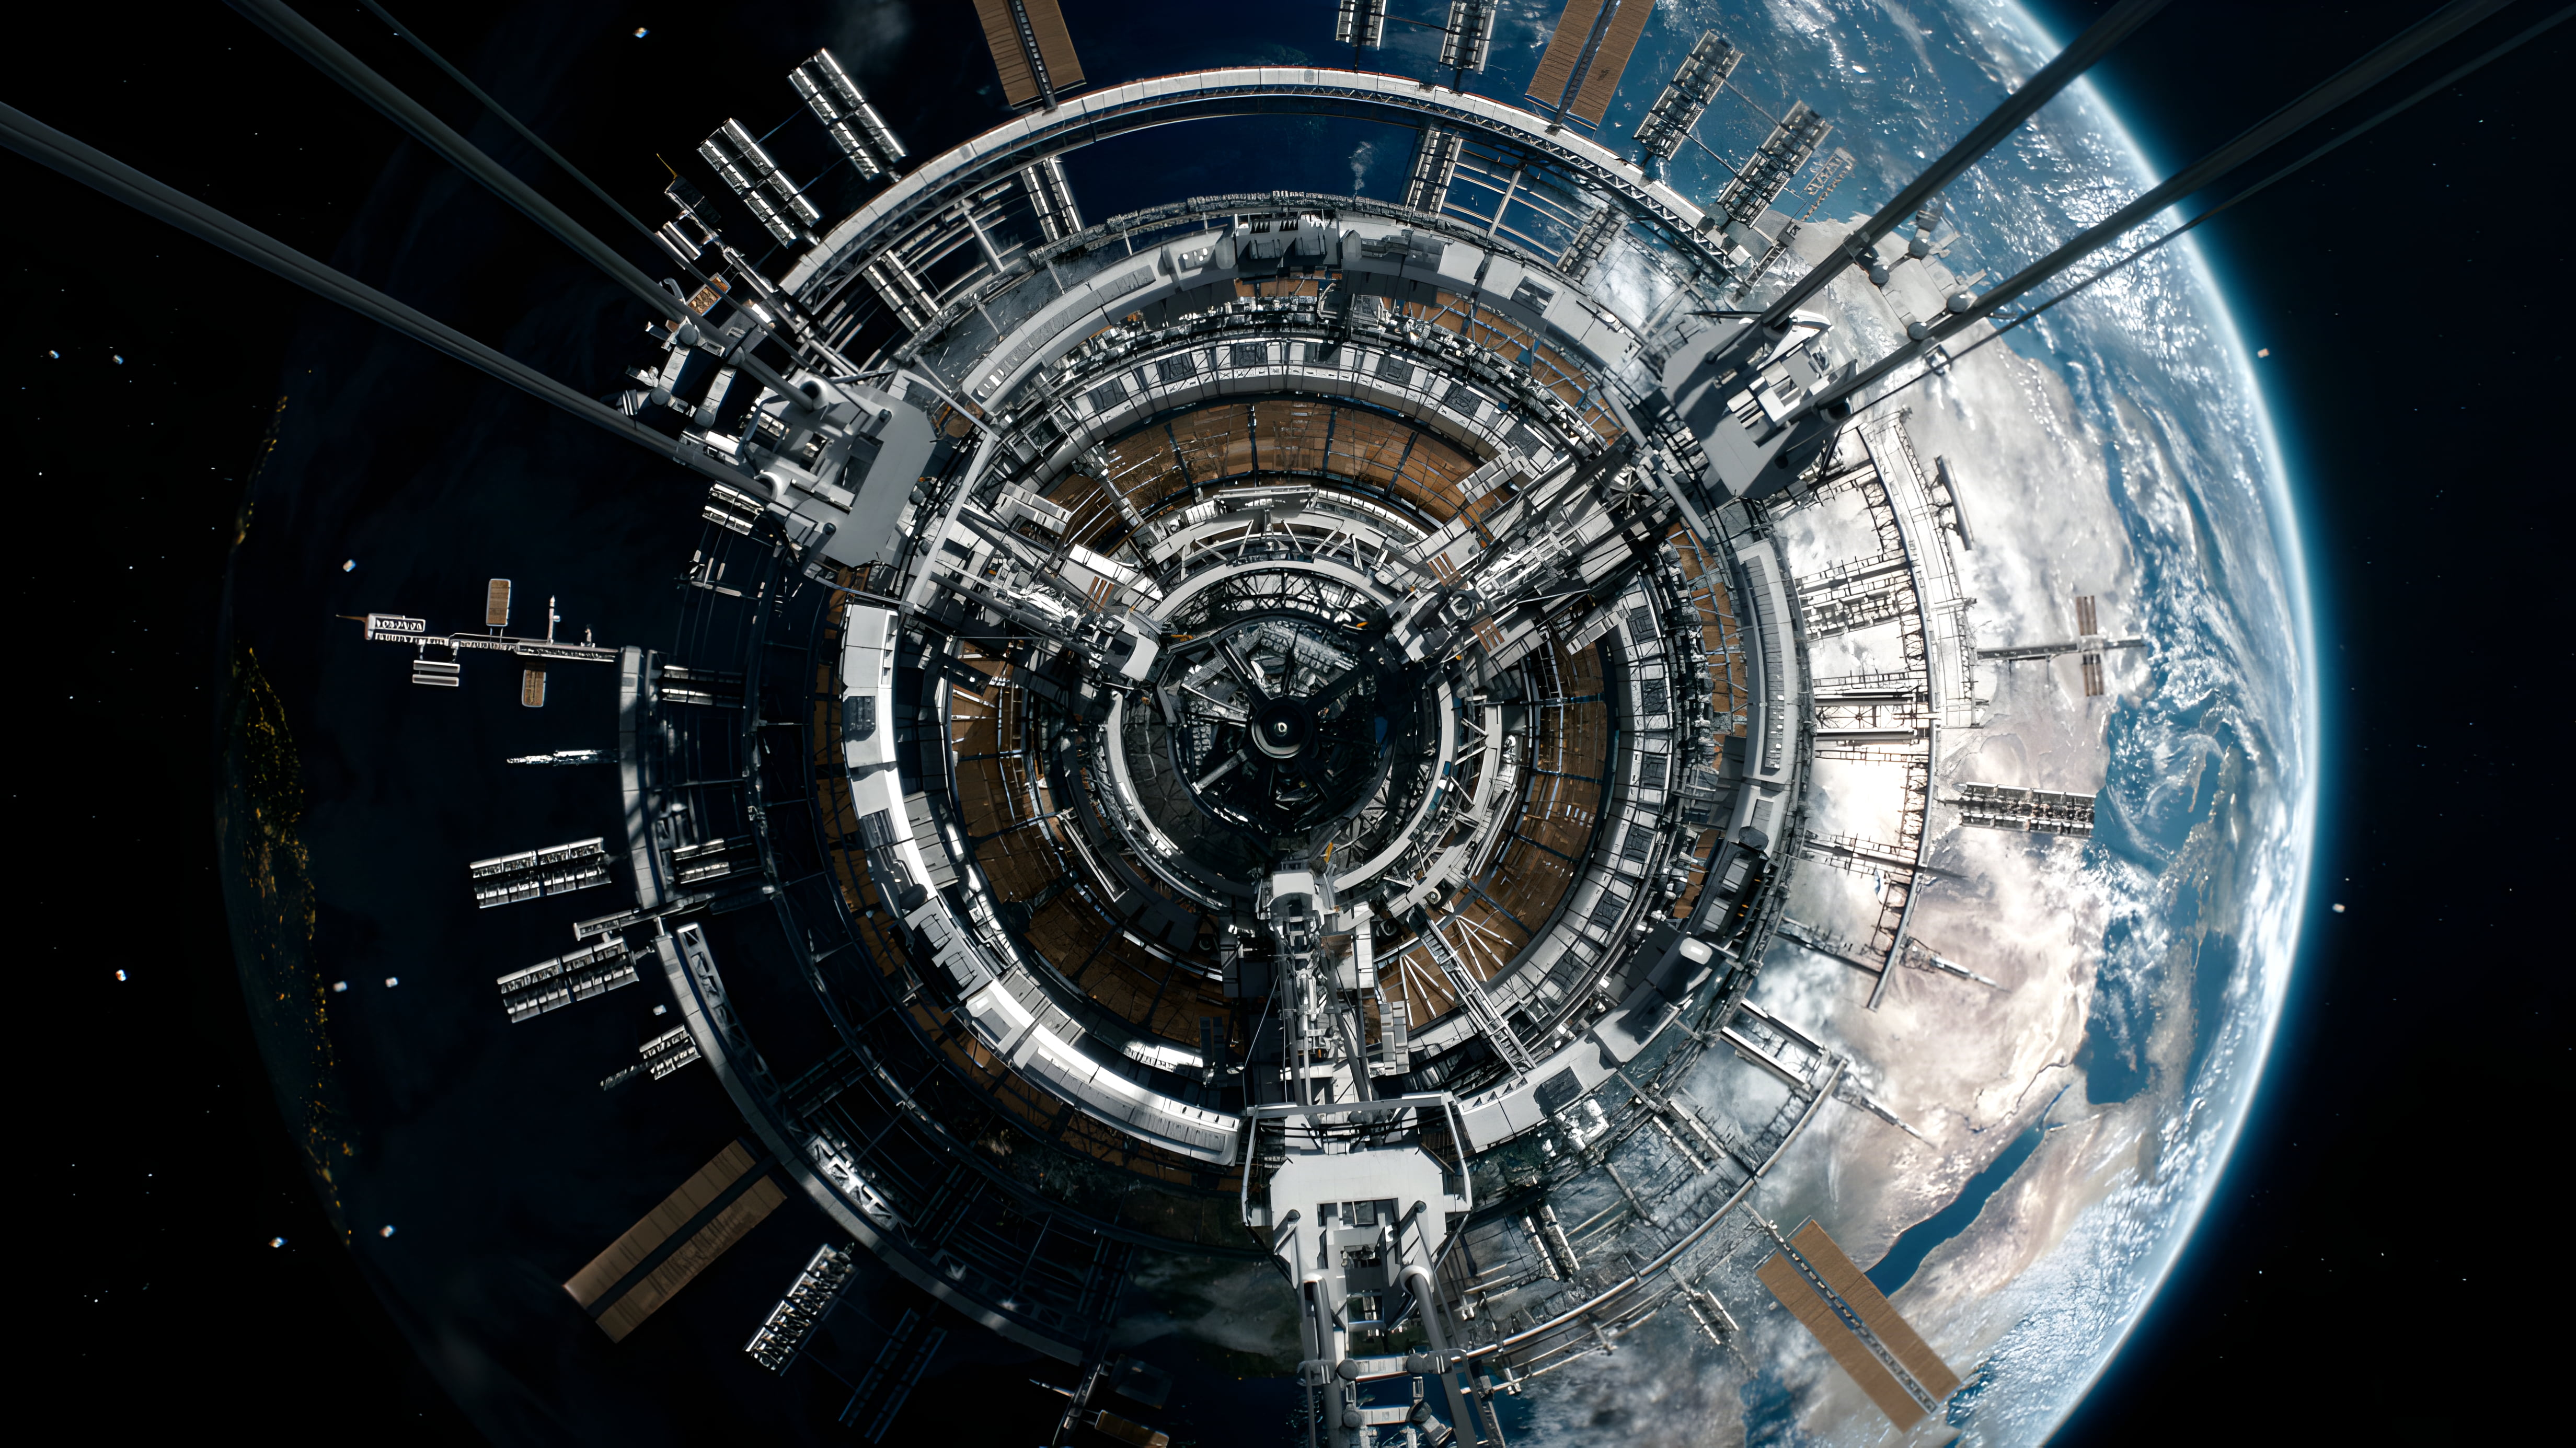 The Wandering Earth 2, space elevator, movies, China